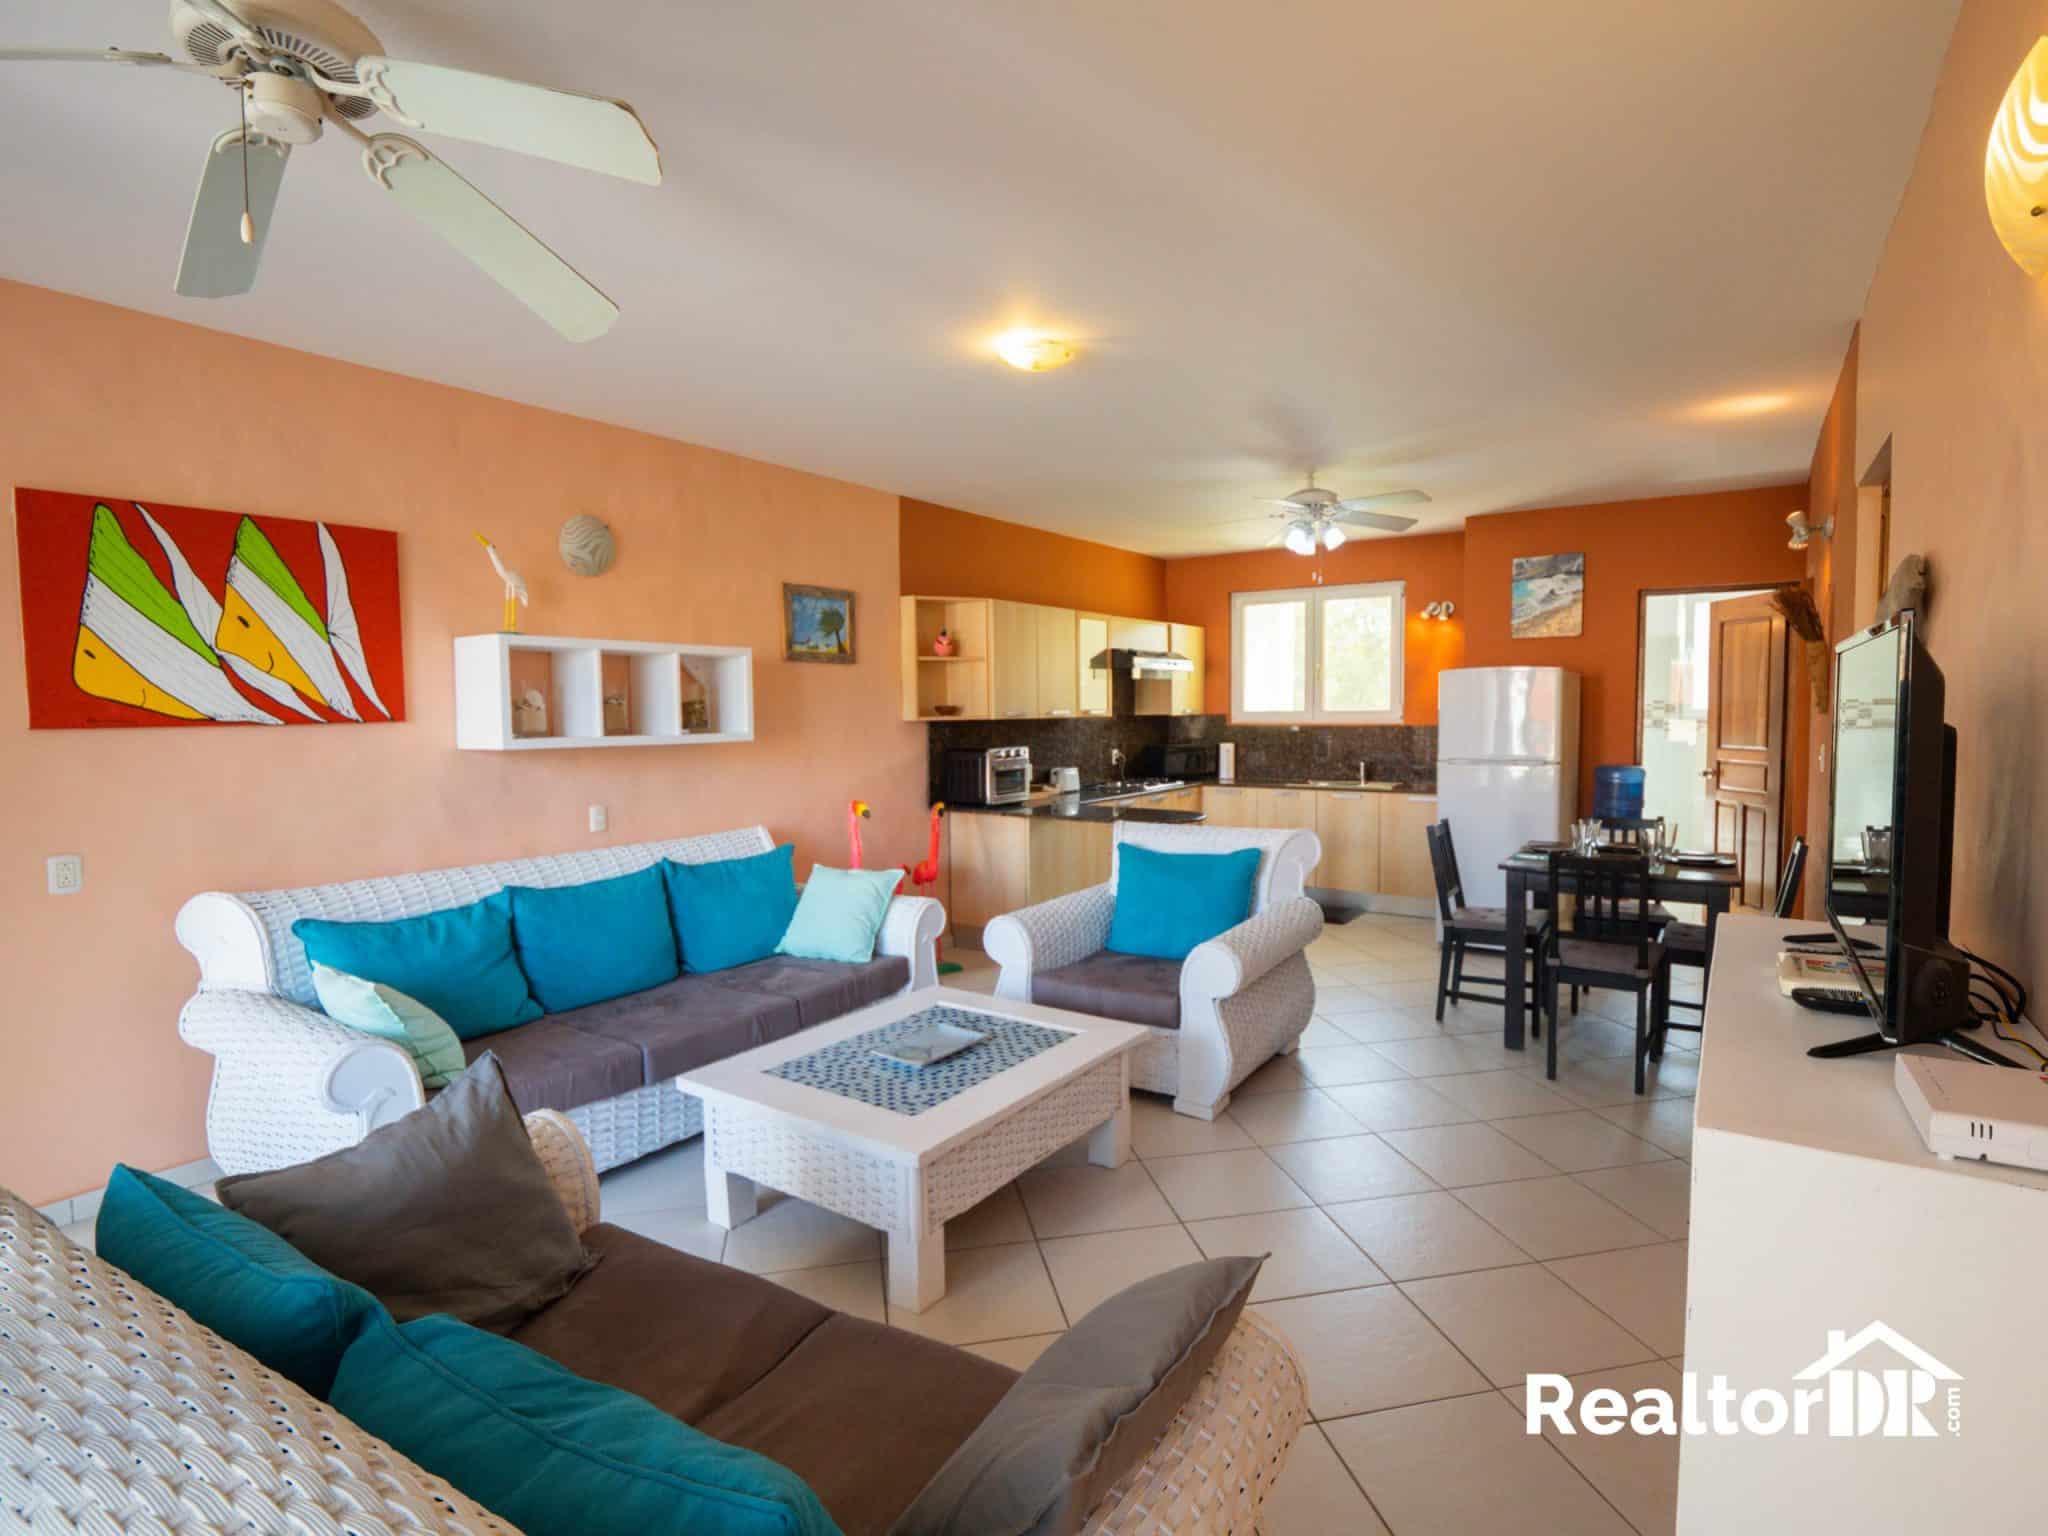 Best location in the center of Cabarete -Exclusive To RealtorDR-